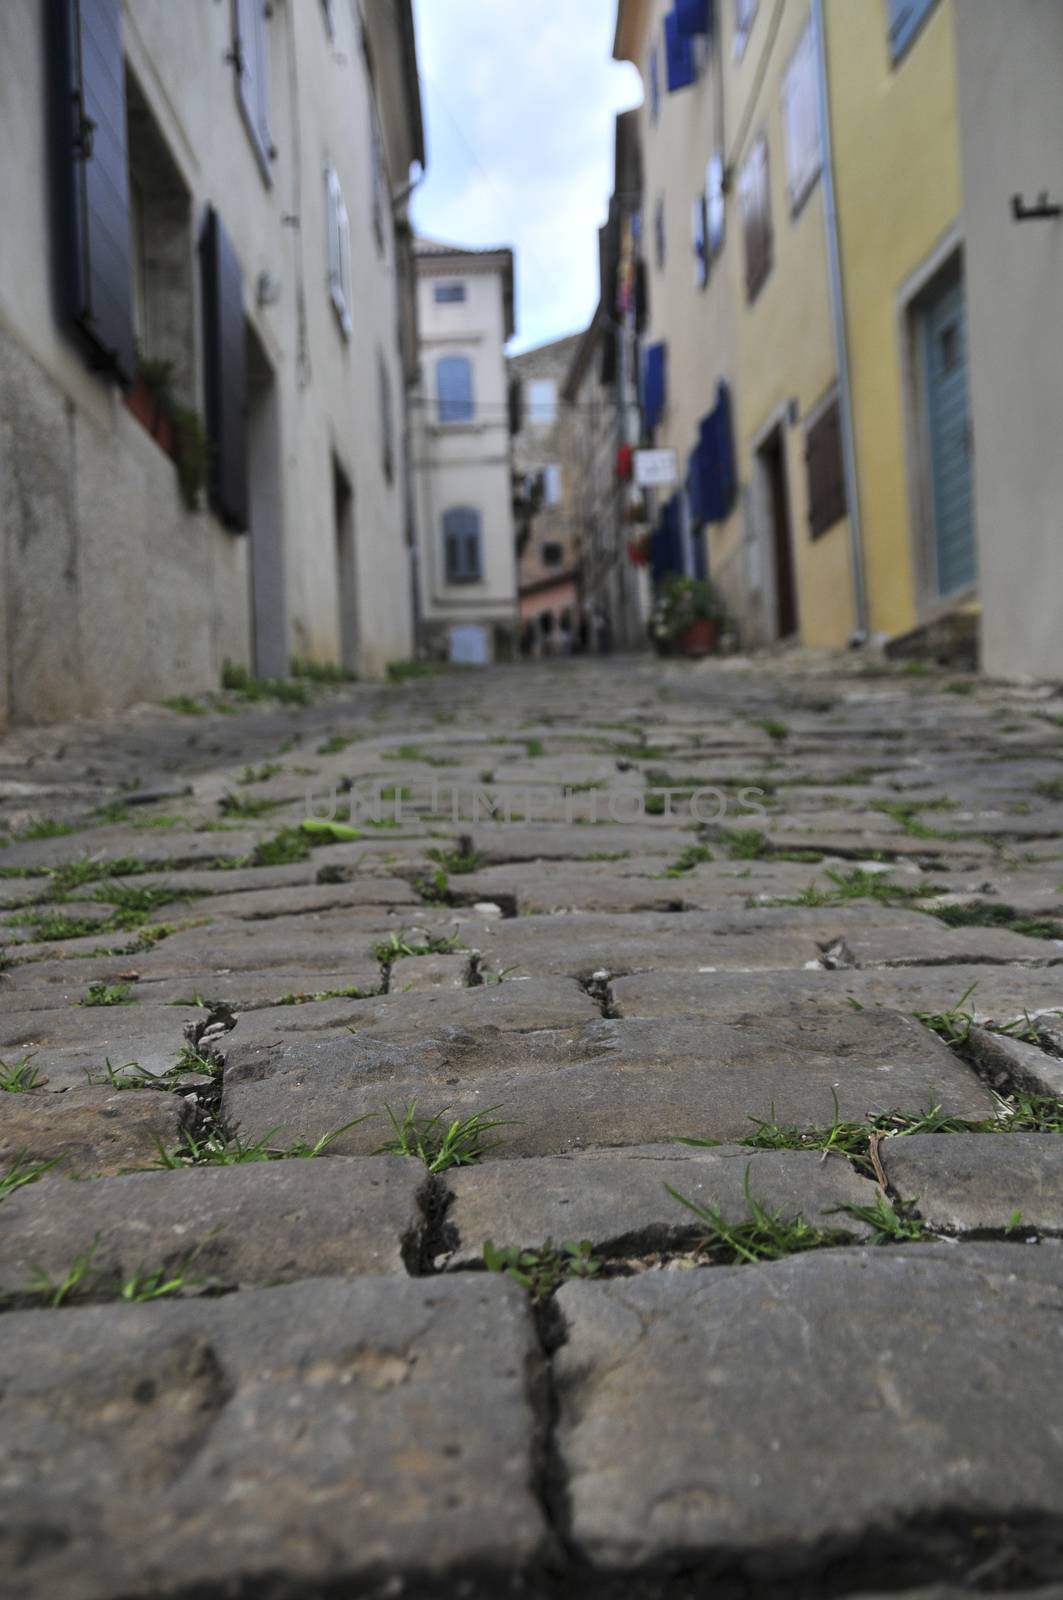 Detail of street stone pavement in a medieval town, houses and buildings in background out of focus for effect